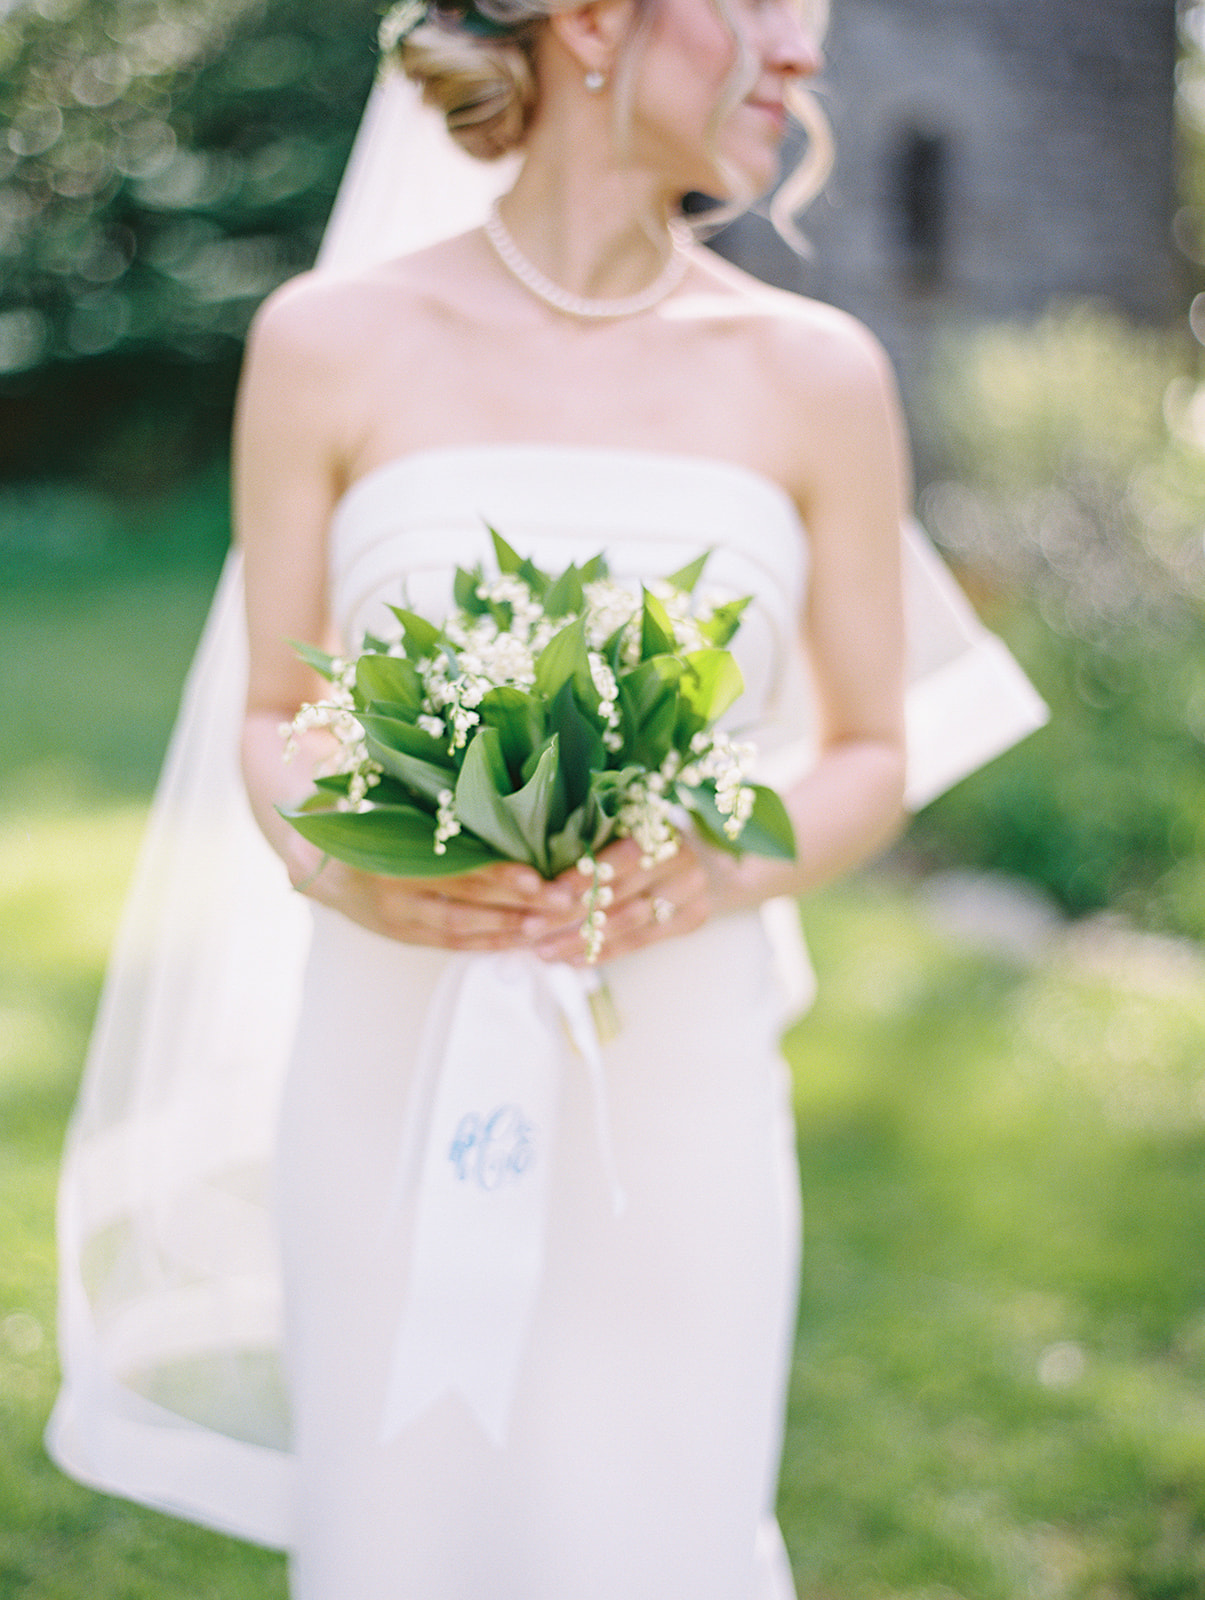 sweet lilly of the valley bridal bouquet at preppy Grandmillennial Intimate Backyard Spring Afternoon Wedding in Philade